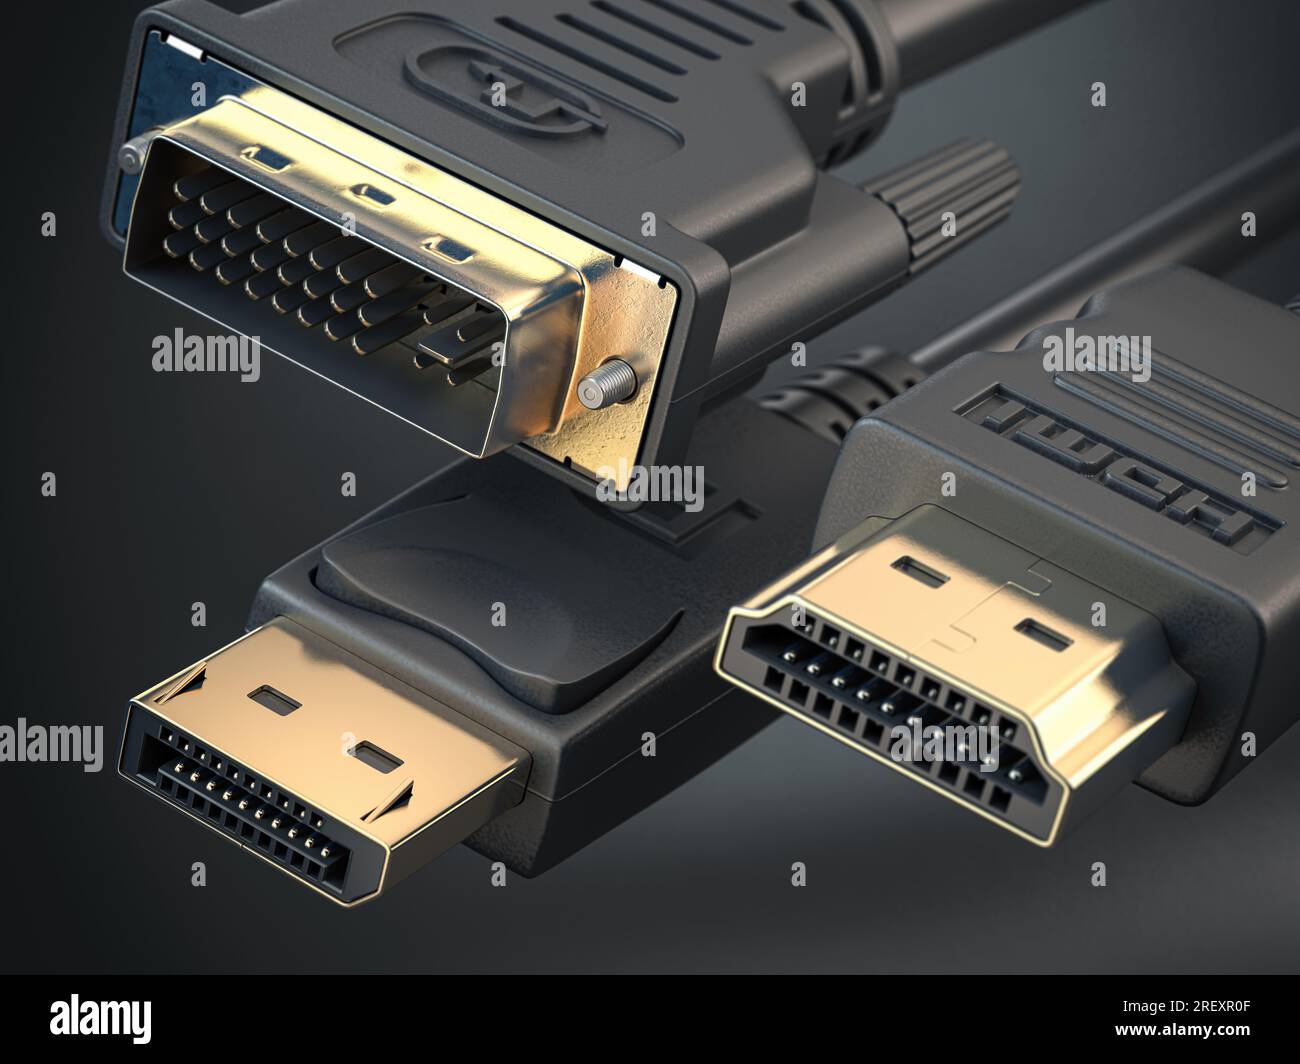 HDMI, Display port and DVI cables. Most common types of digital video cables and display connectors. 3d illustration Stock Photo